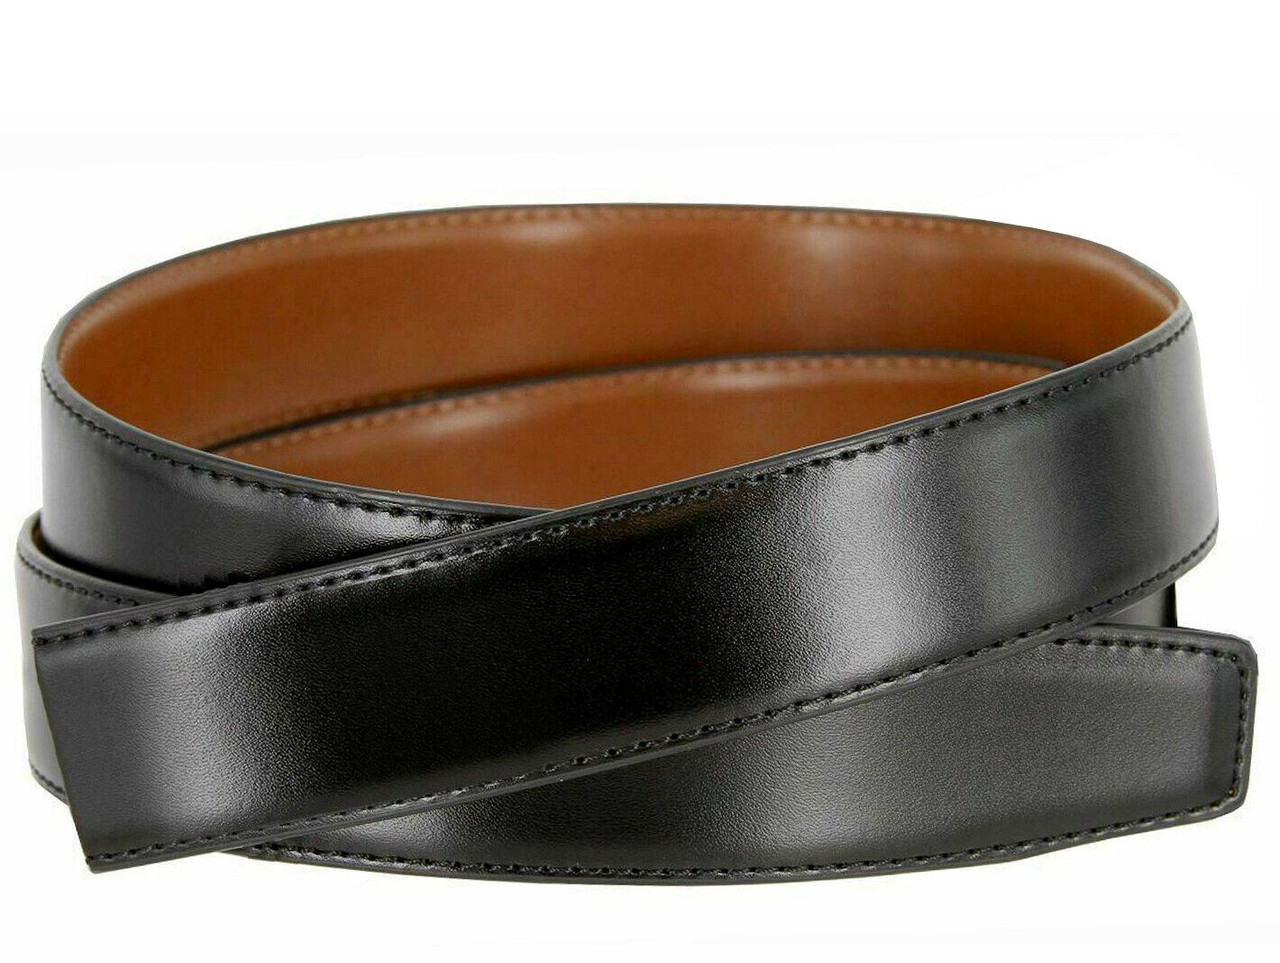 160506 Reversible Belt Strap Without Buckle Replacement Genuine Leather  Dress Belt Strap, 1-1/4(32mm) wide (Black/Tan)